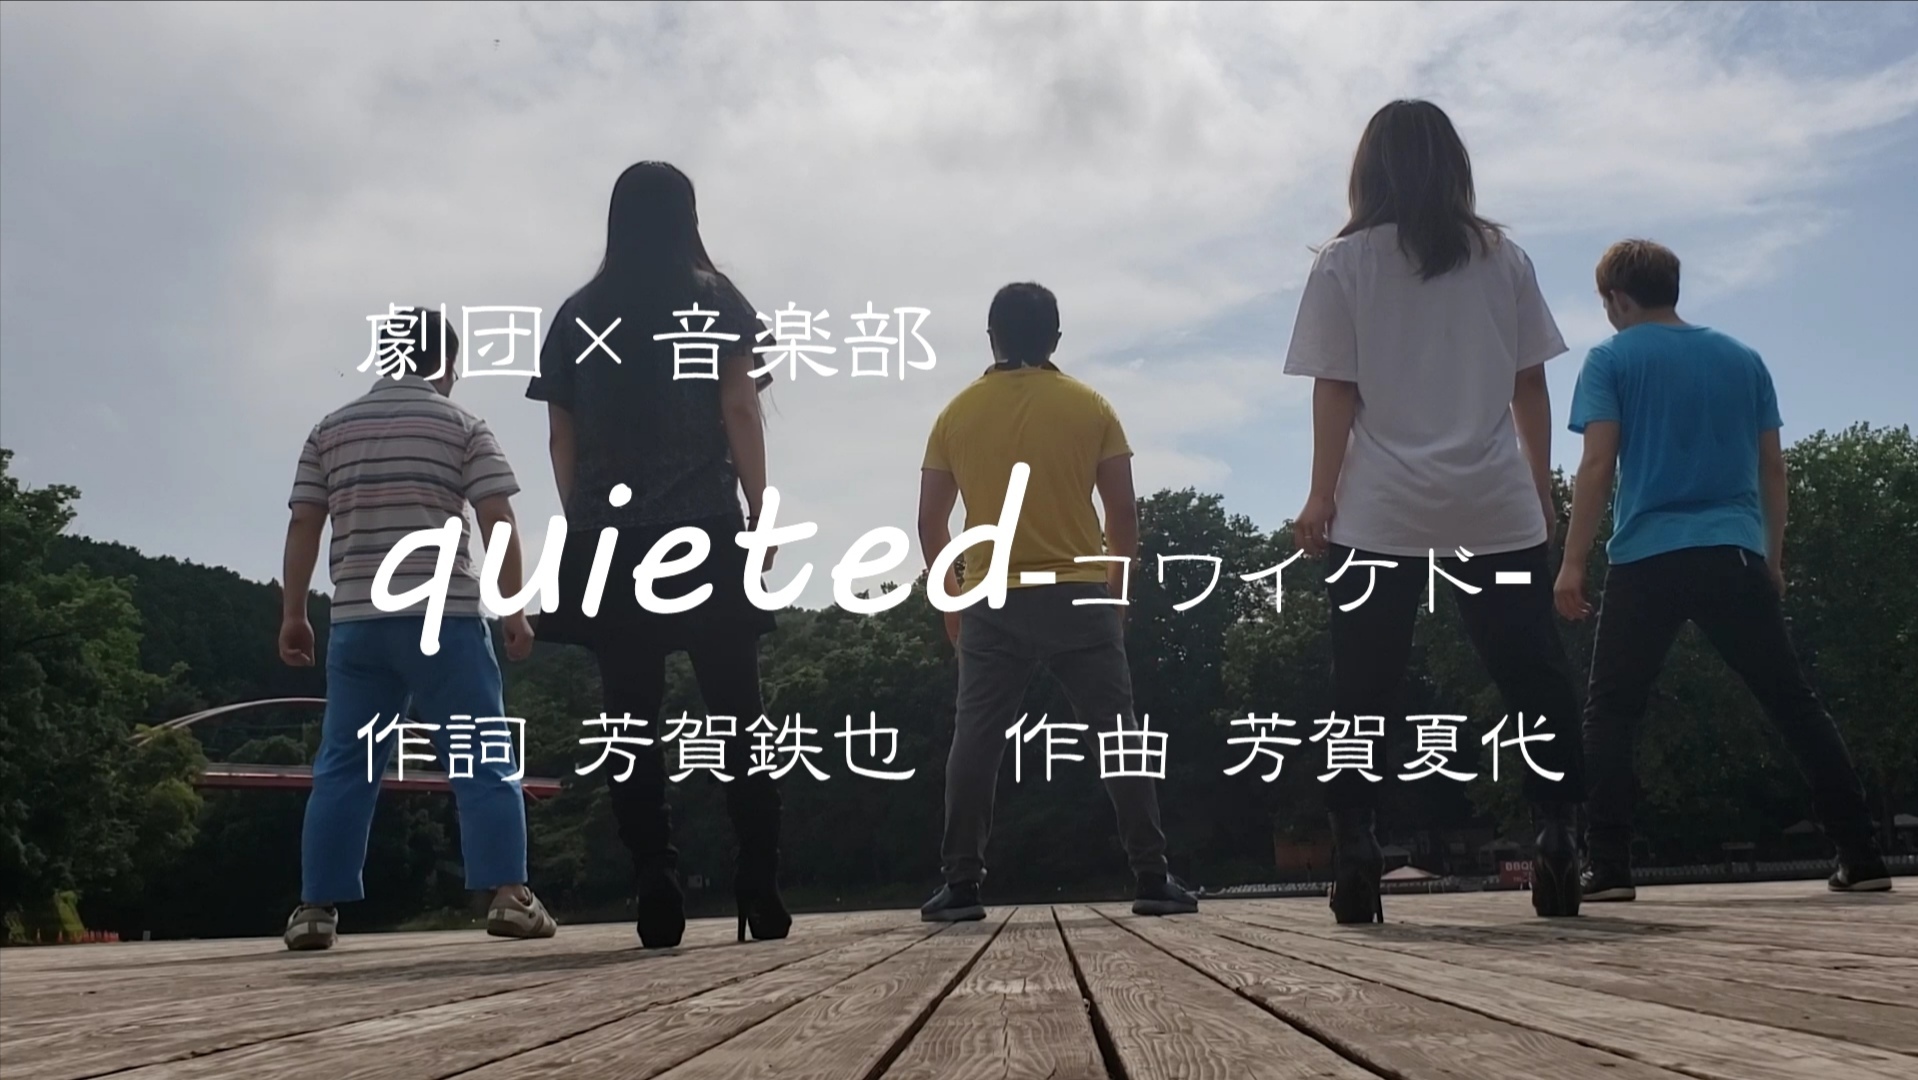 quieted-コワイケド- in 飯能河原